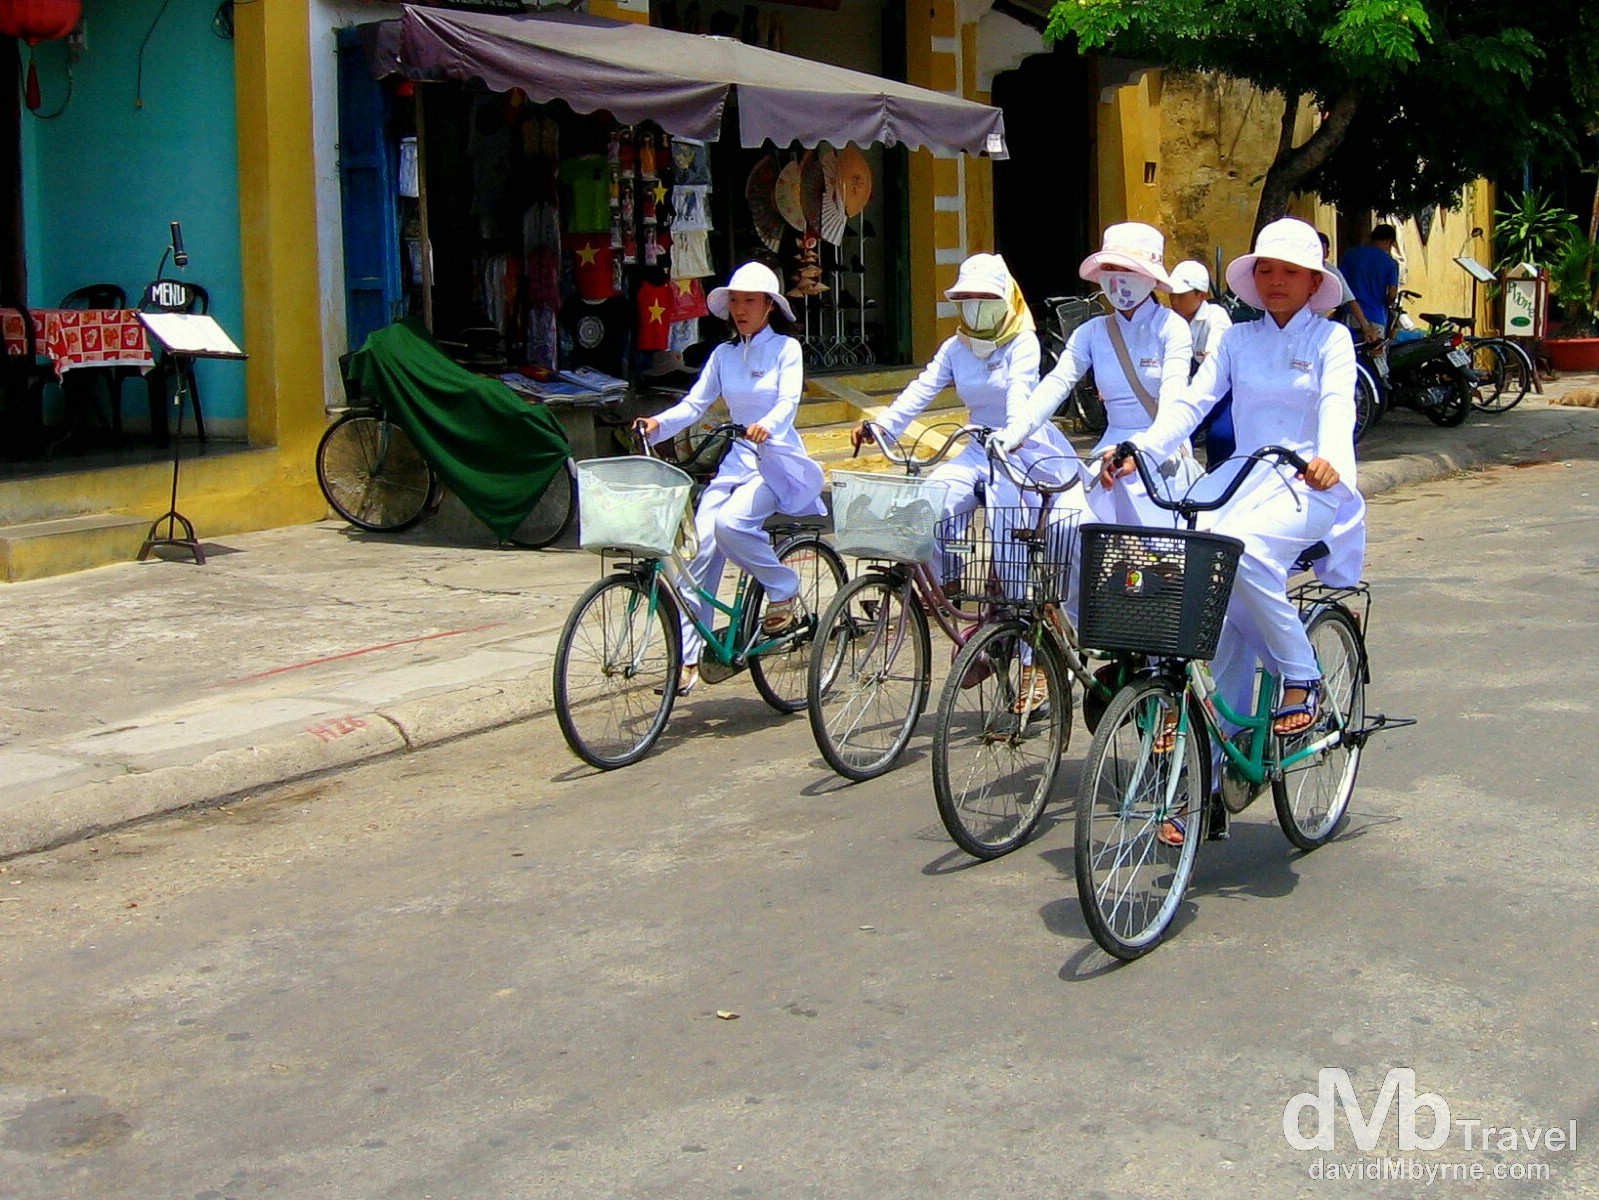 On the streets of Hoi An, Central Vietnam. September 10th, 2005.